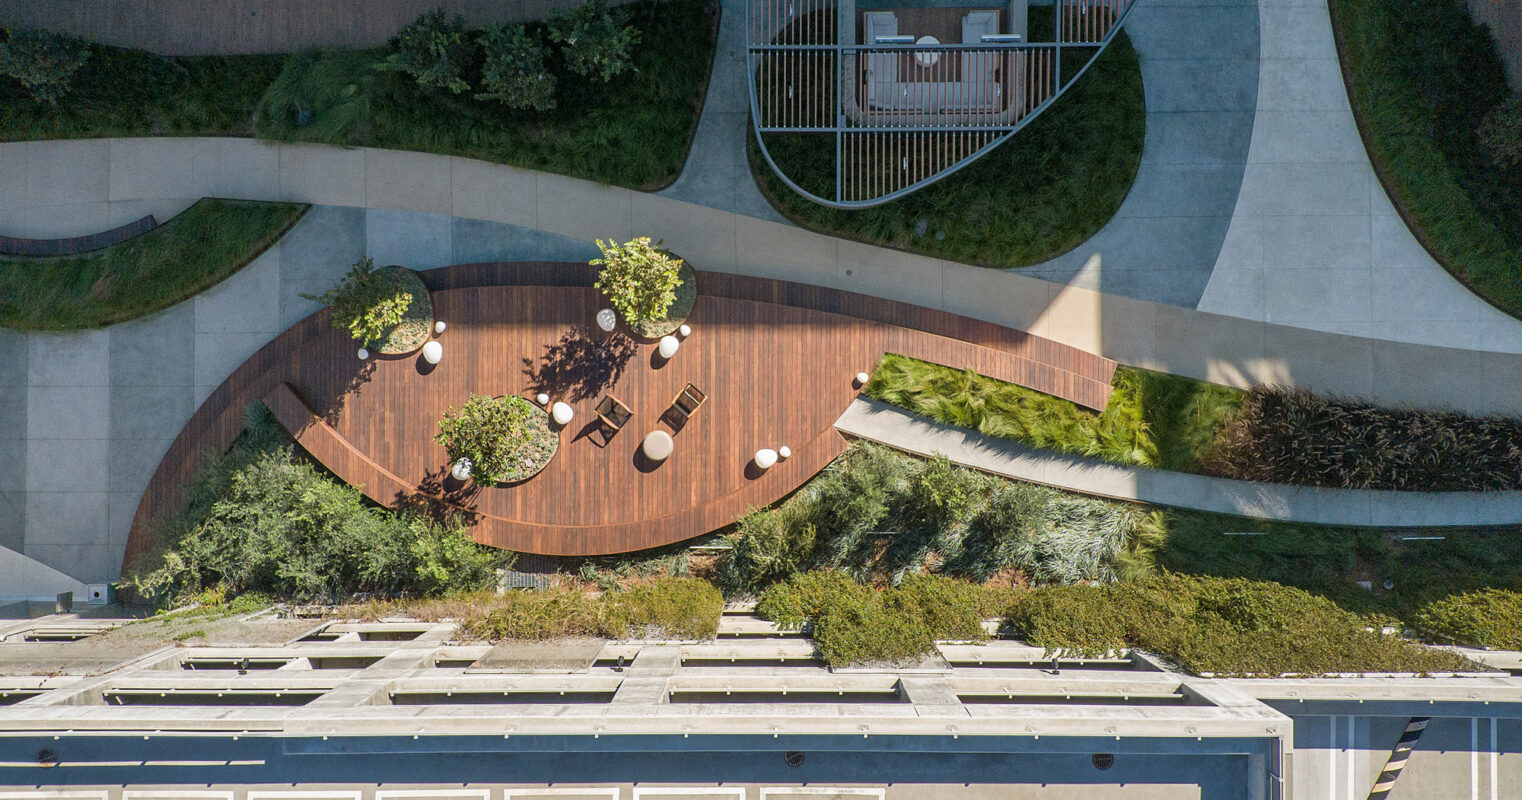 Aerial view of a landscaped rooftop garden, featuring curved wooden pathways, interspersed with green planting areas, and modern outdoor furniture for relaxation. The design seamlessly integrates natural elements with the building's architecture.